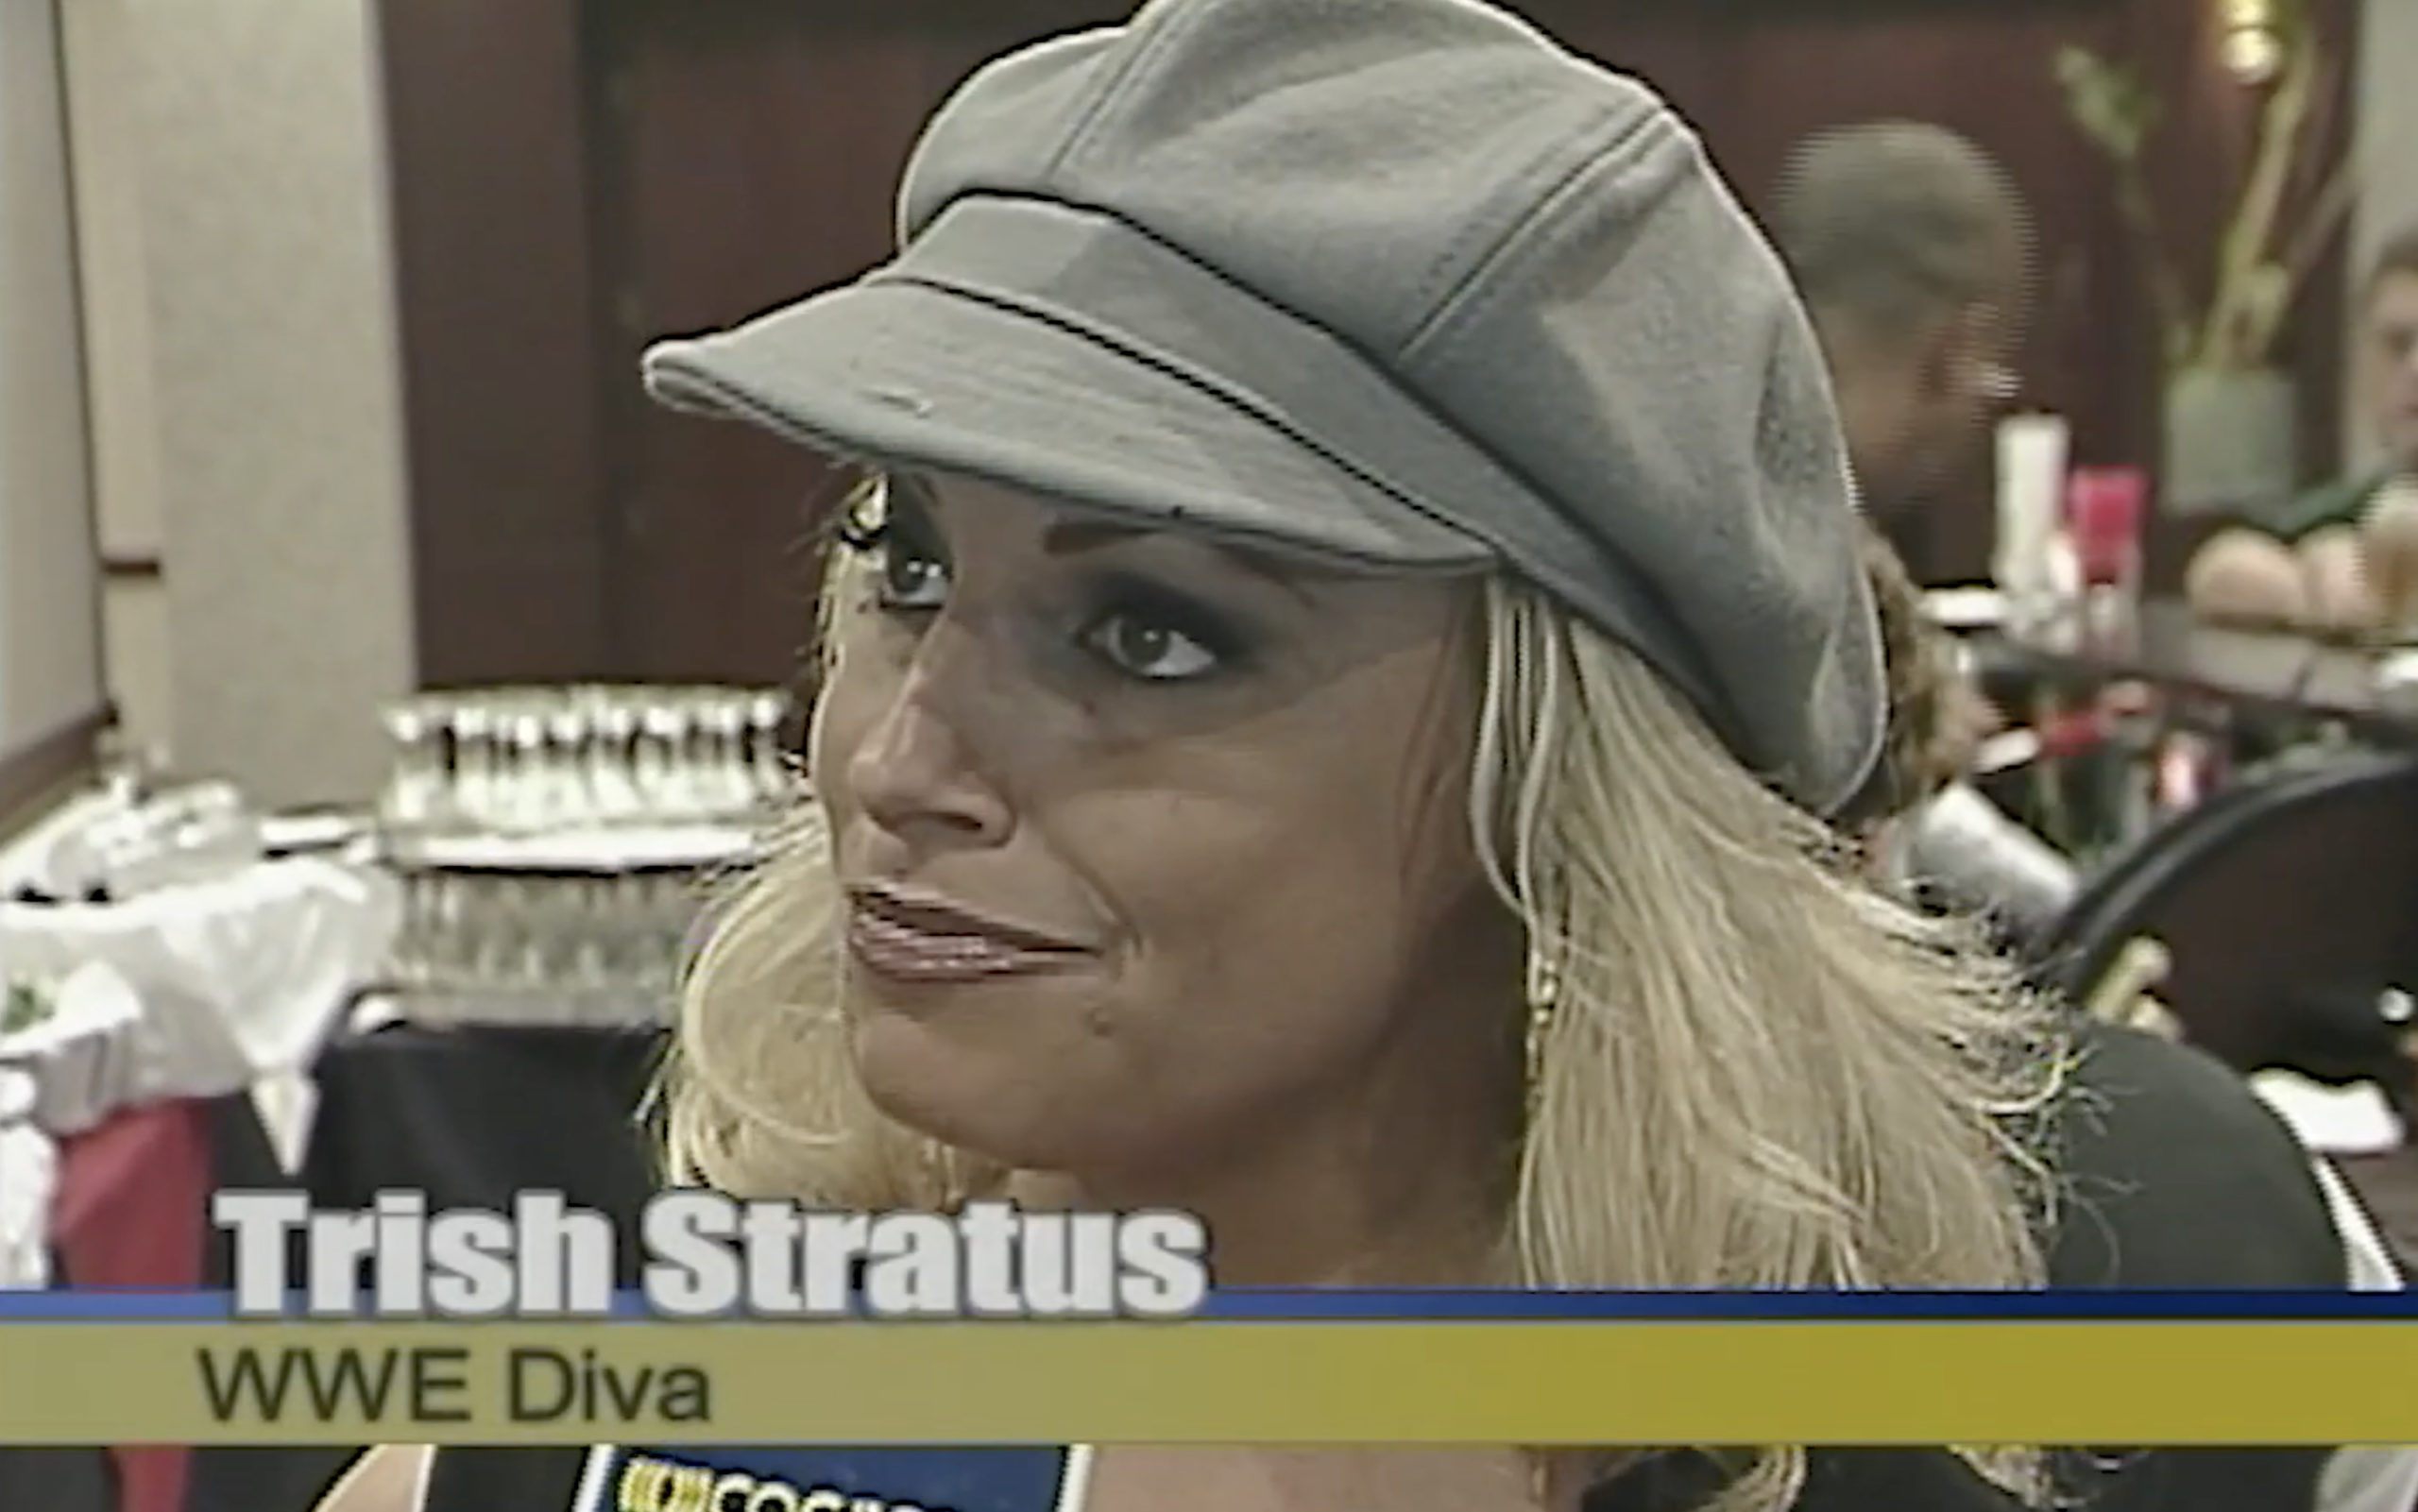 Who did trish stratus slept with?